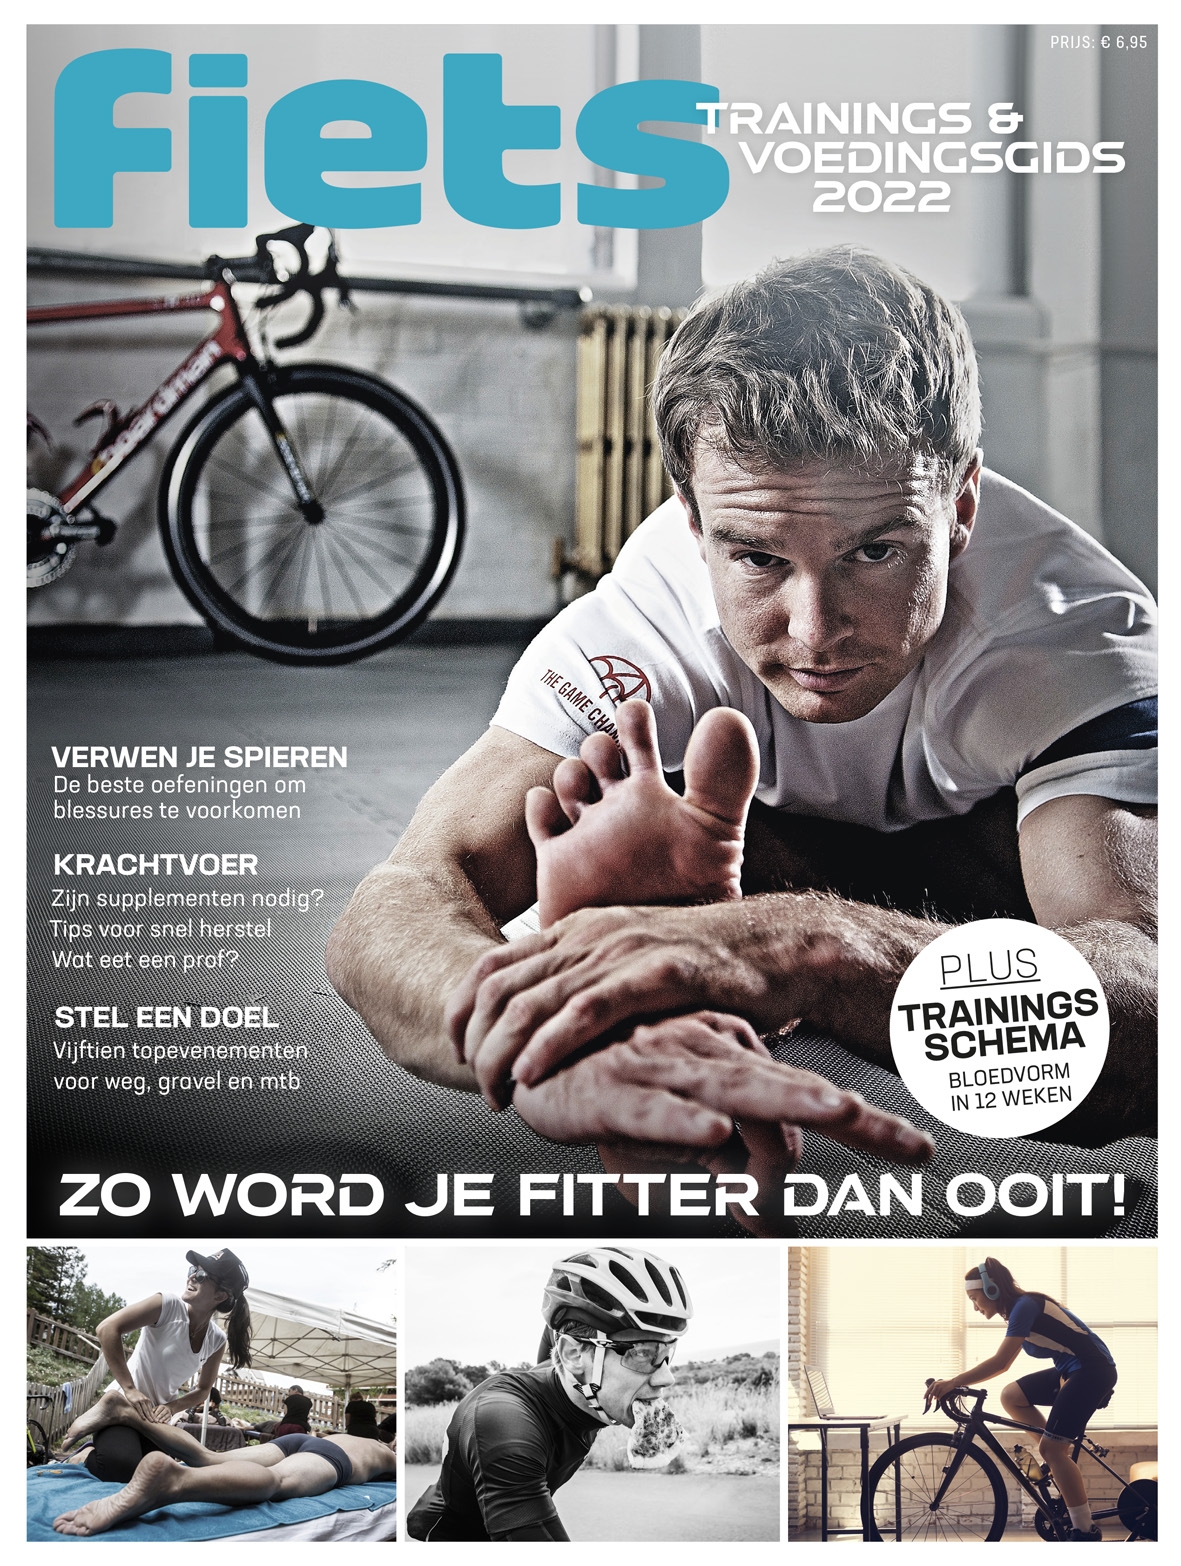 Fiets Trainings Voedingsgids 2021 cover 